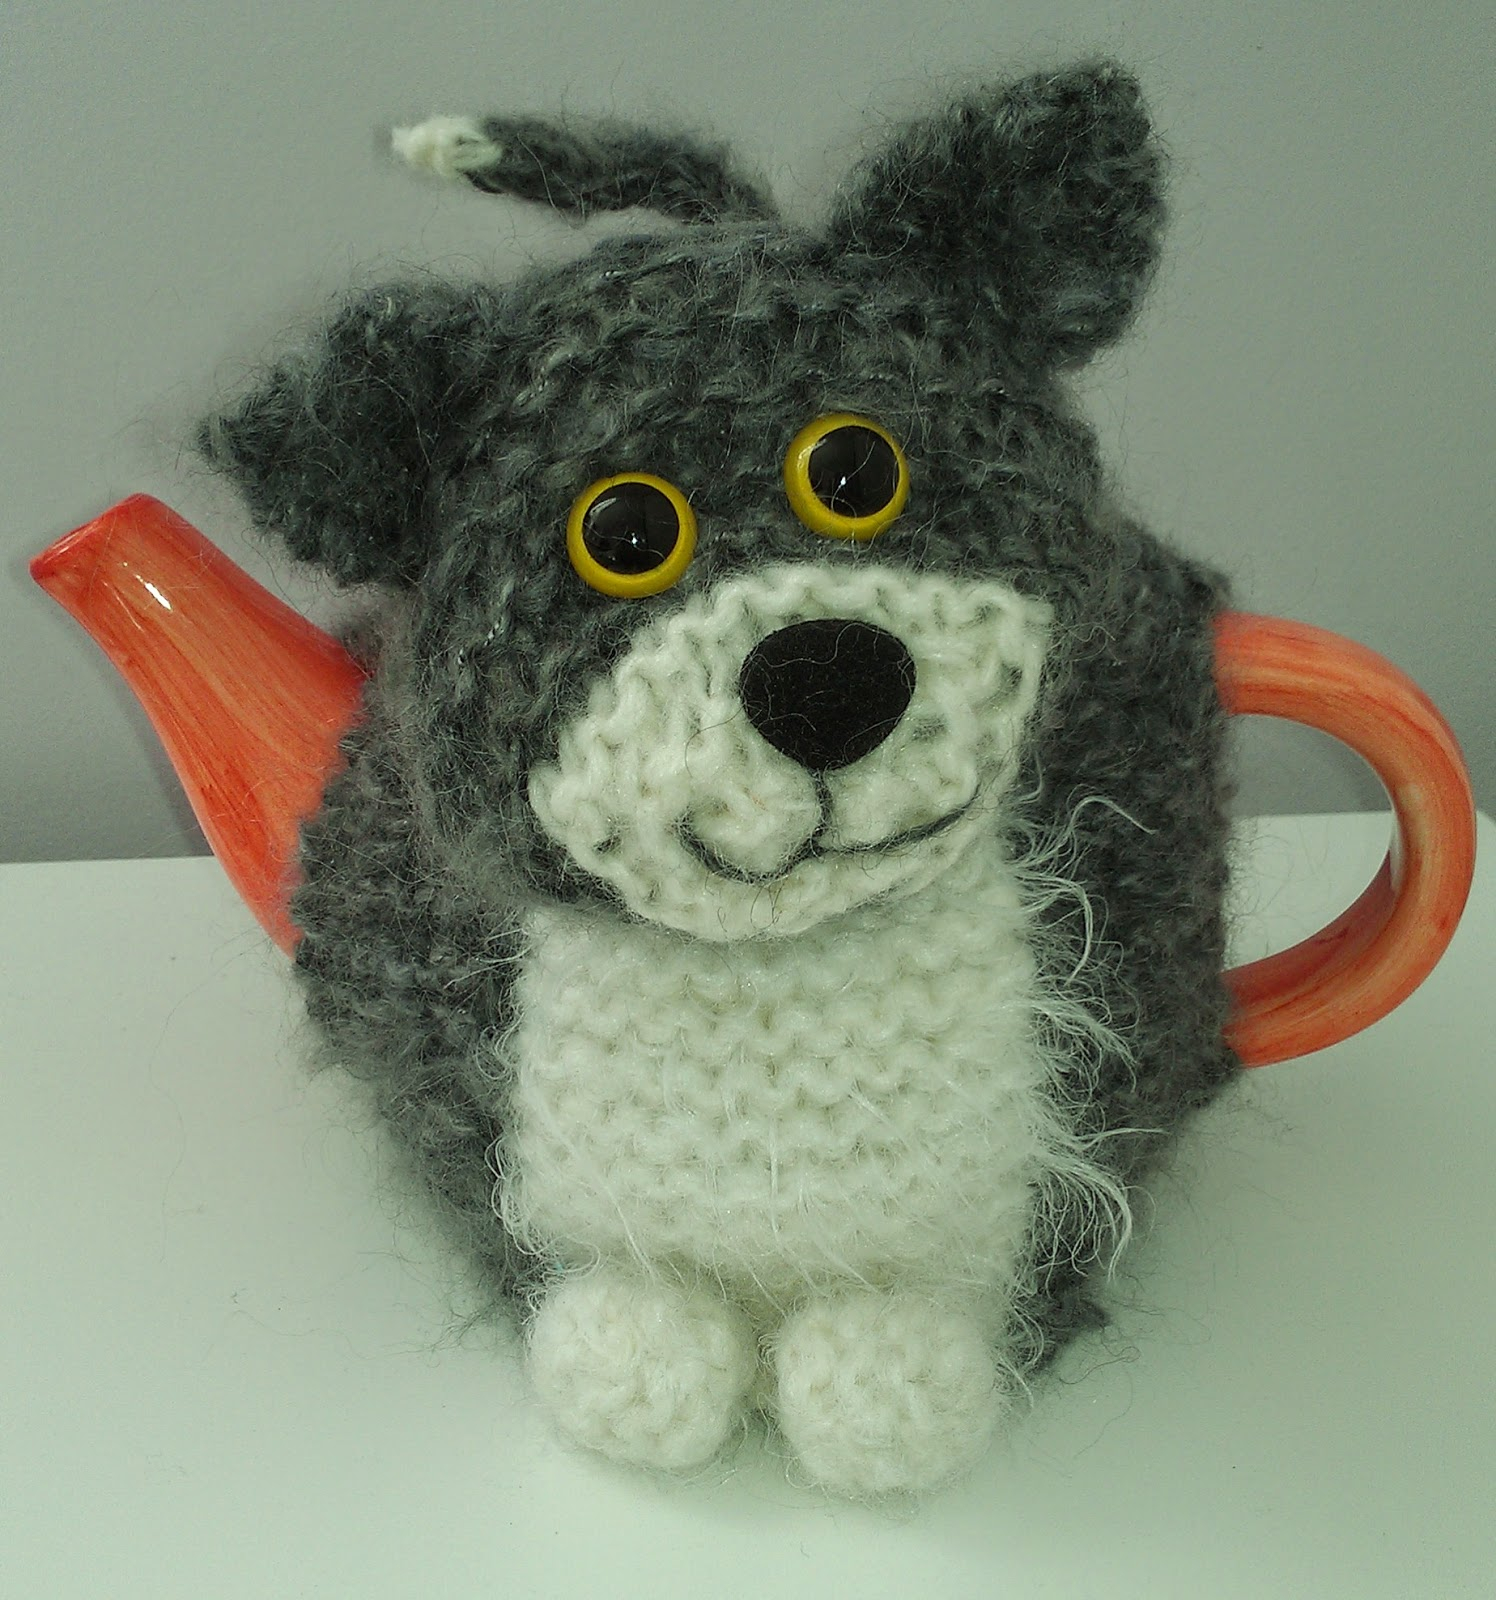 Patterns For Knitted Tea Cosies Craft A Cure For Cancer Free Tea Cosy Patterns Animal Tea Cosies